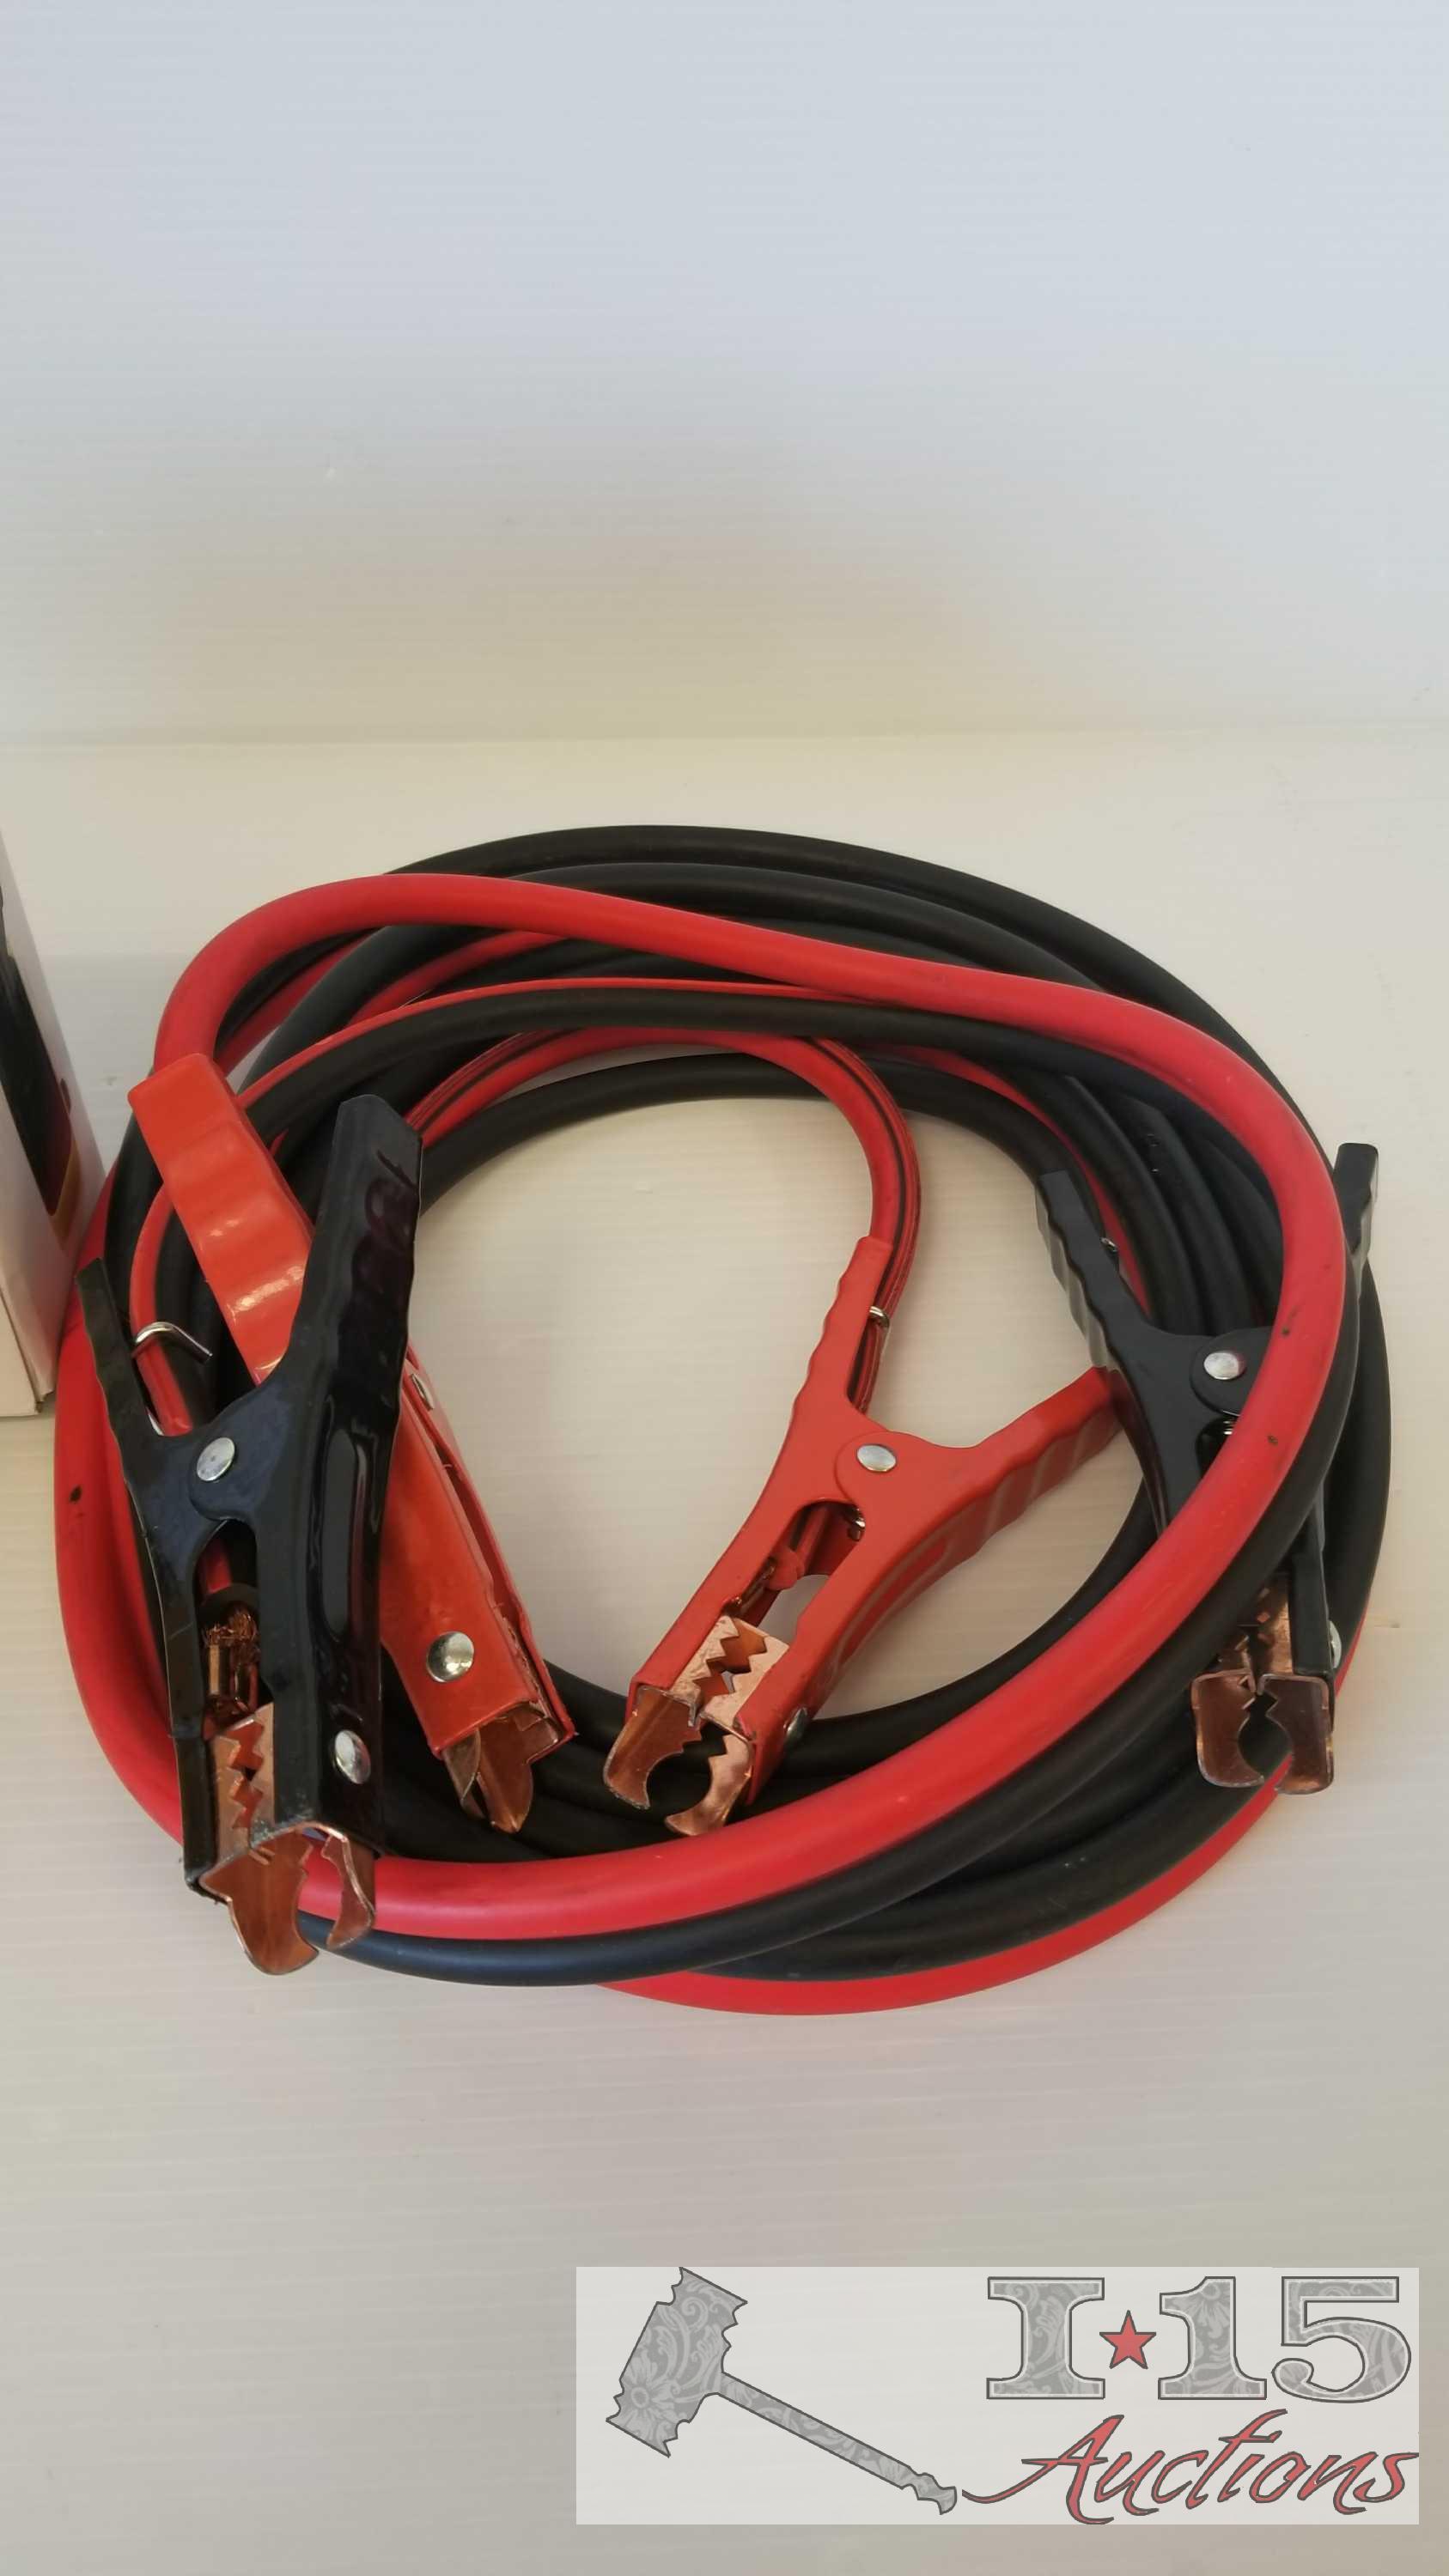 Voyager KA500 and Jumper Cables